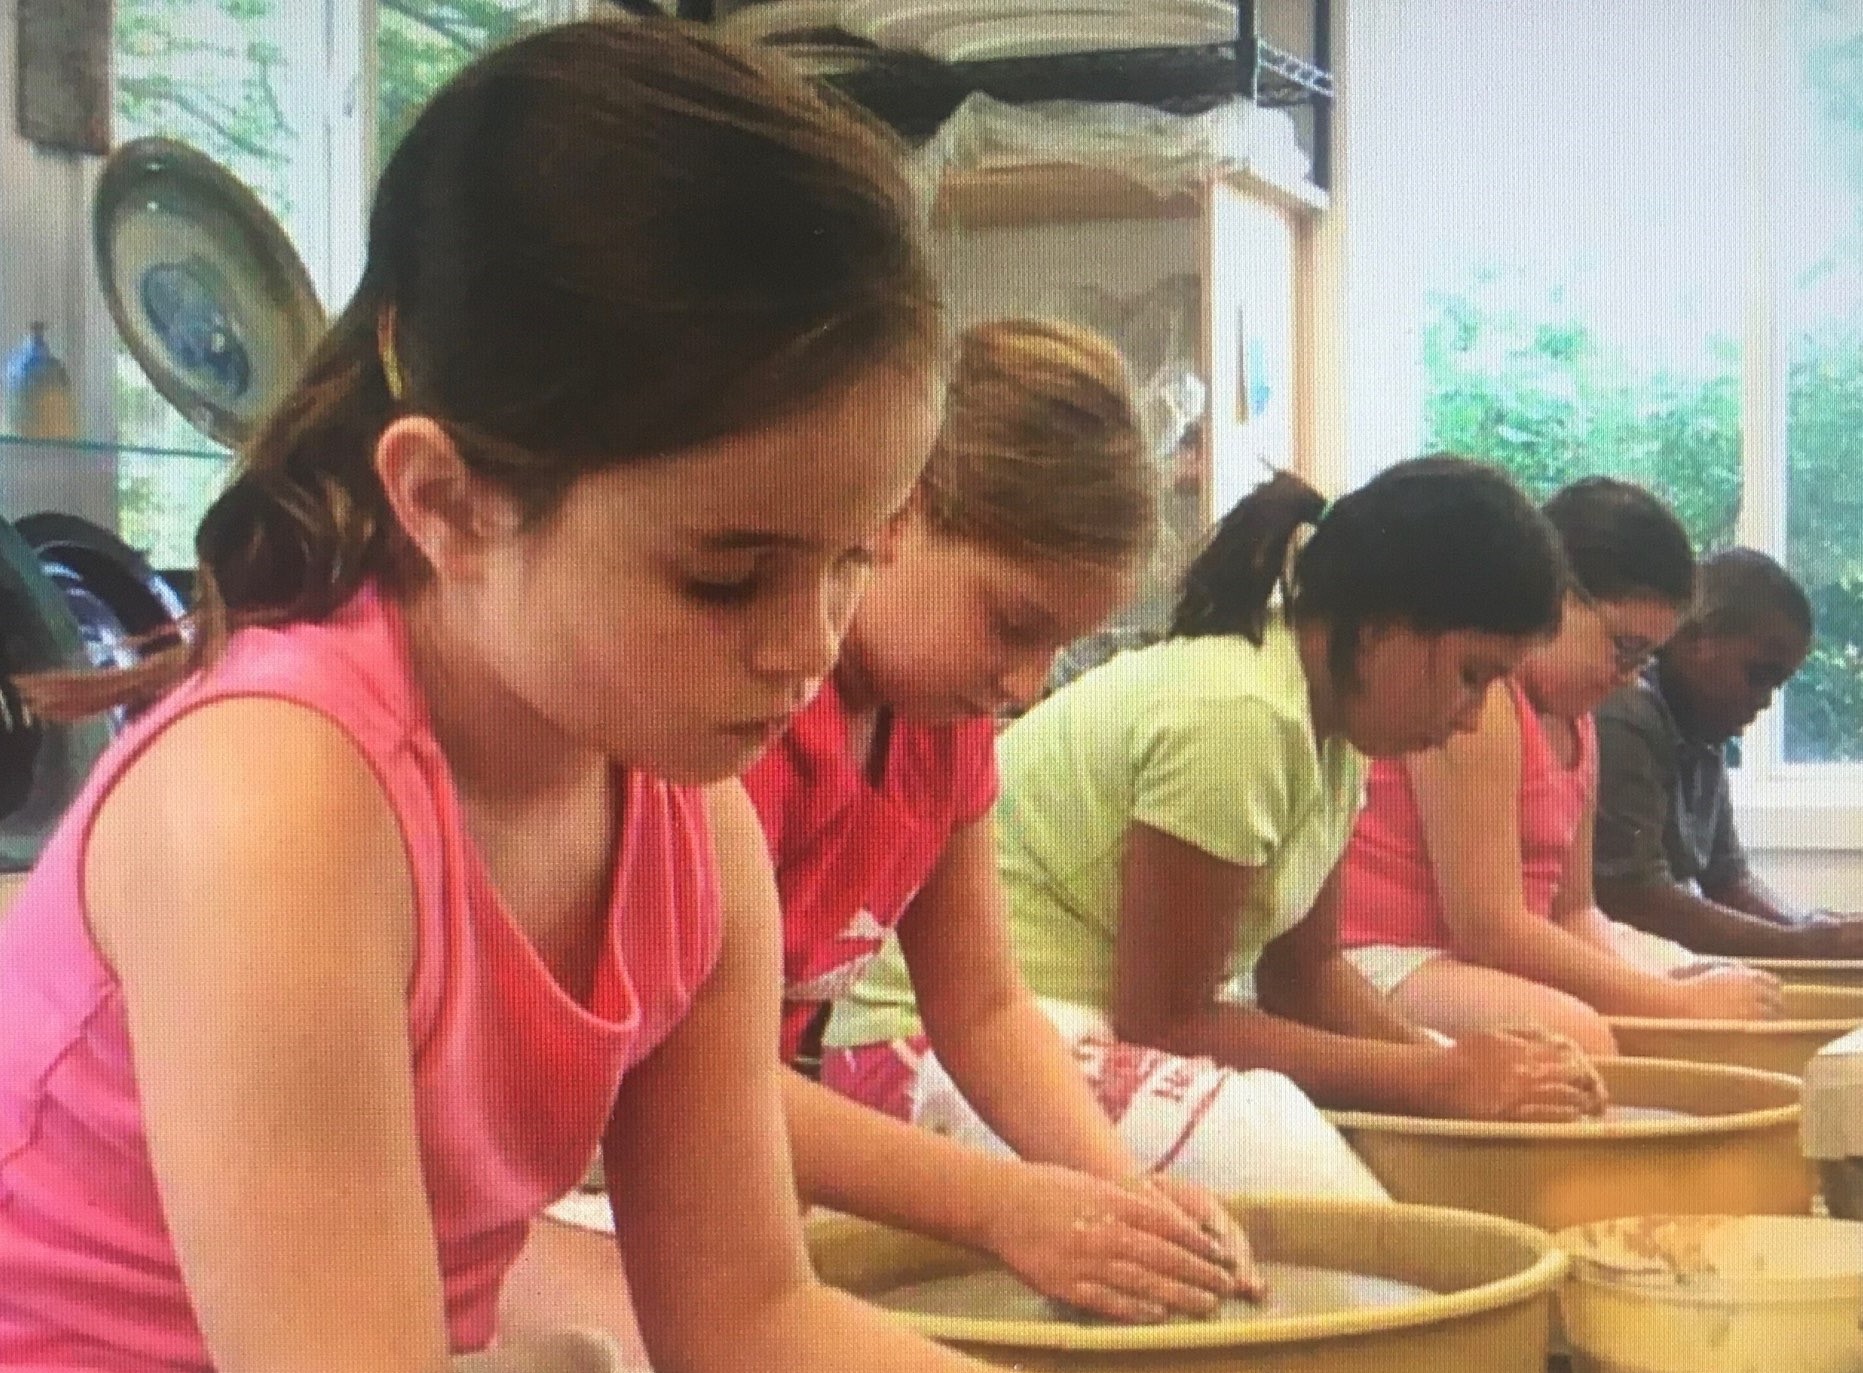 Kids' Class: The Coffee Potter - Ages 10-13 (July 12 and 19)